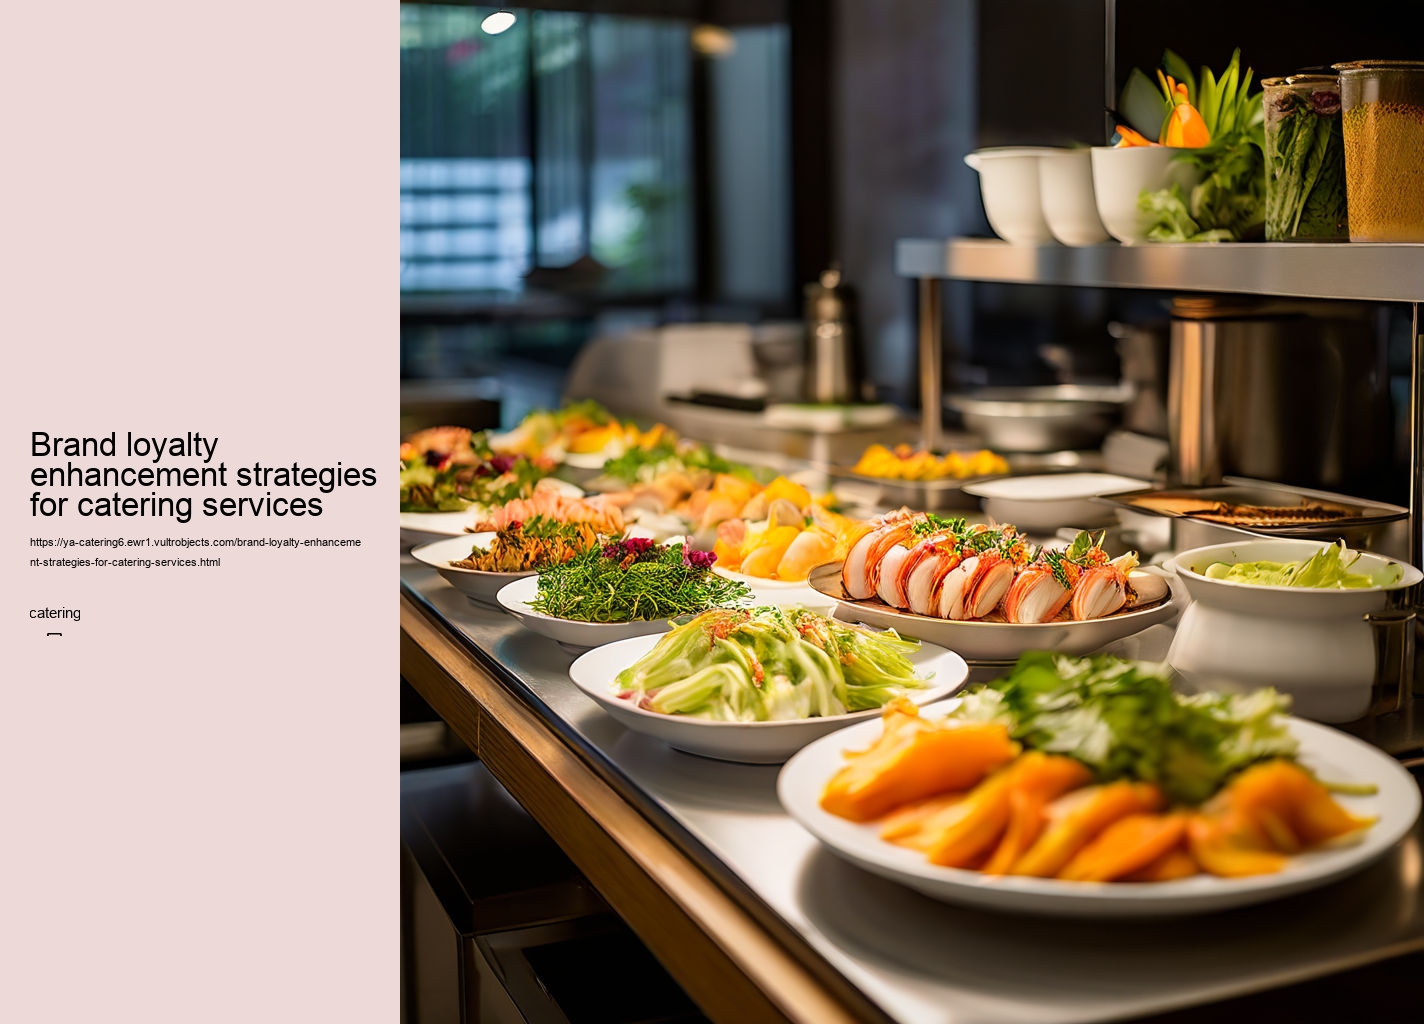 Brand loyalty enhancement strategies for catering services